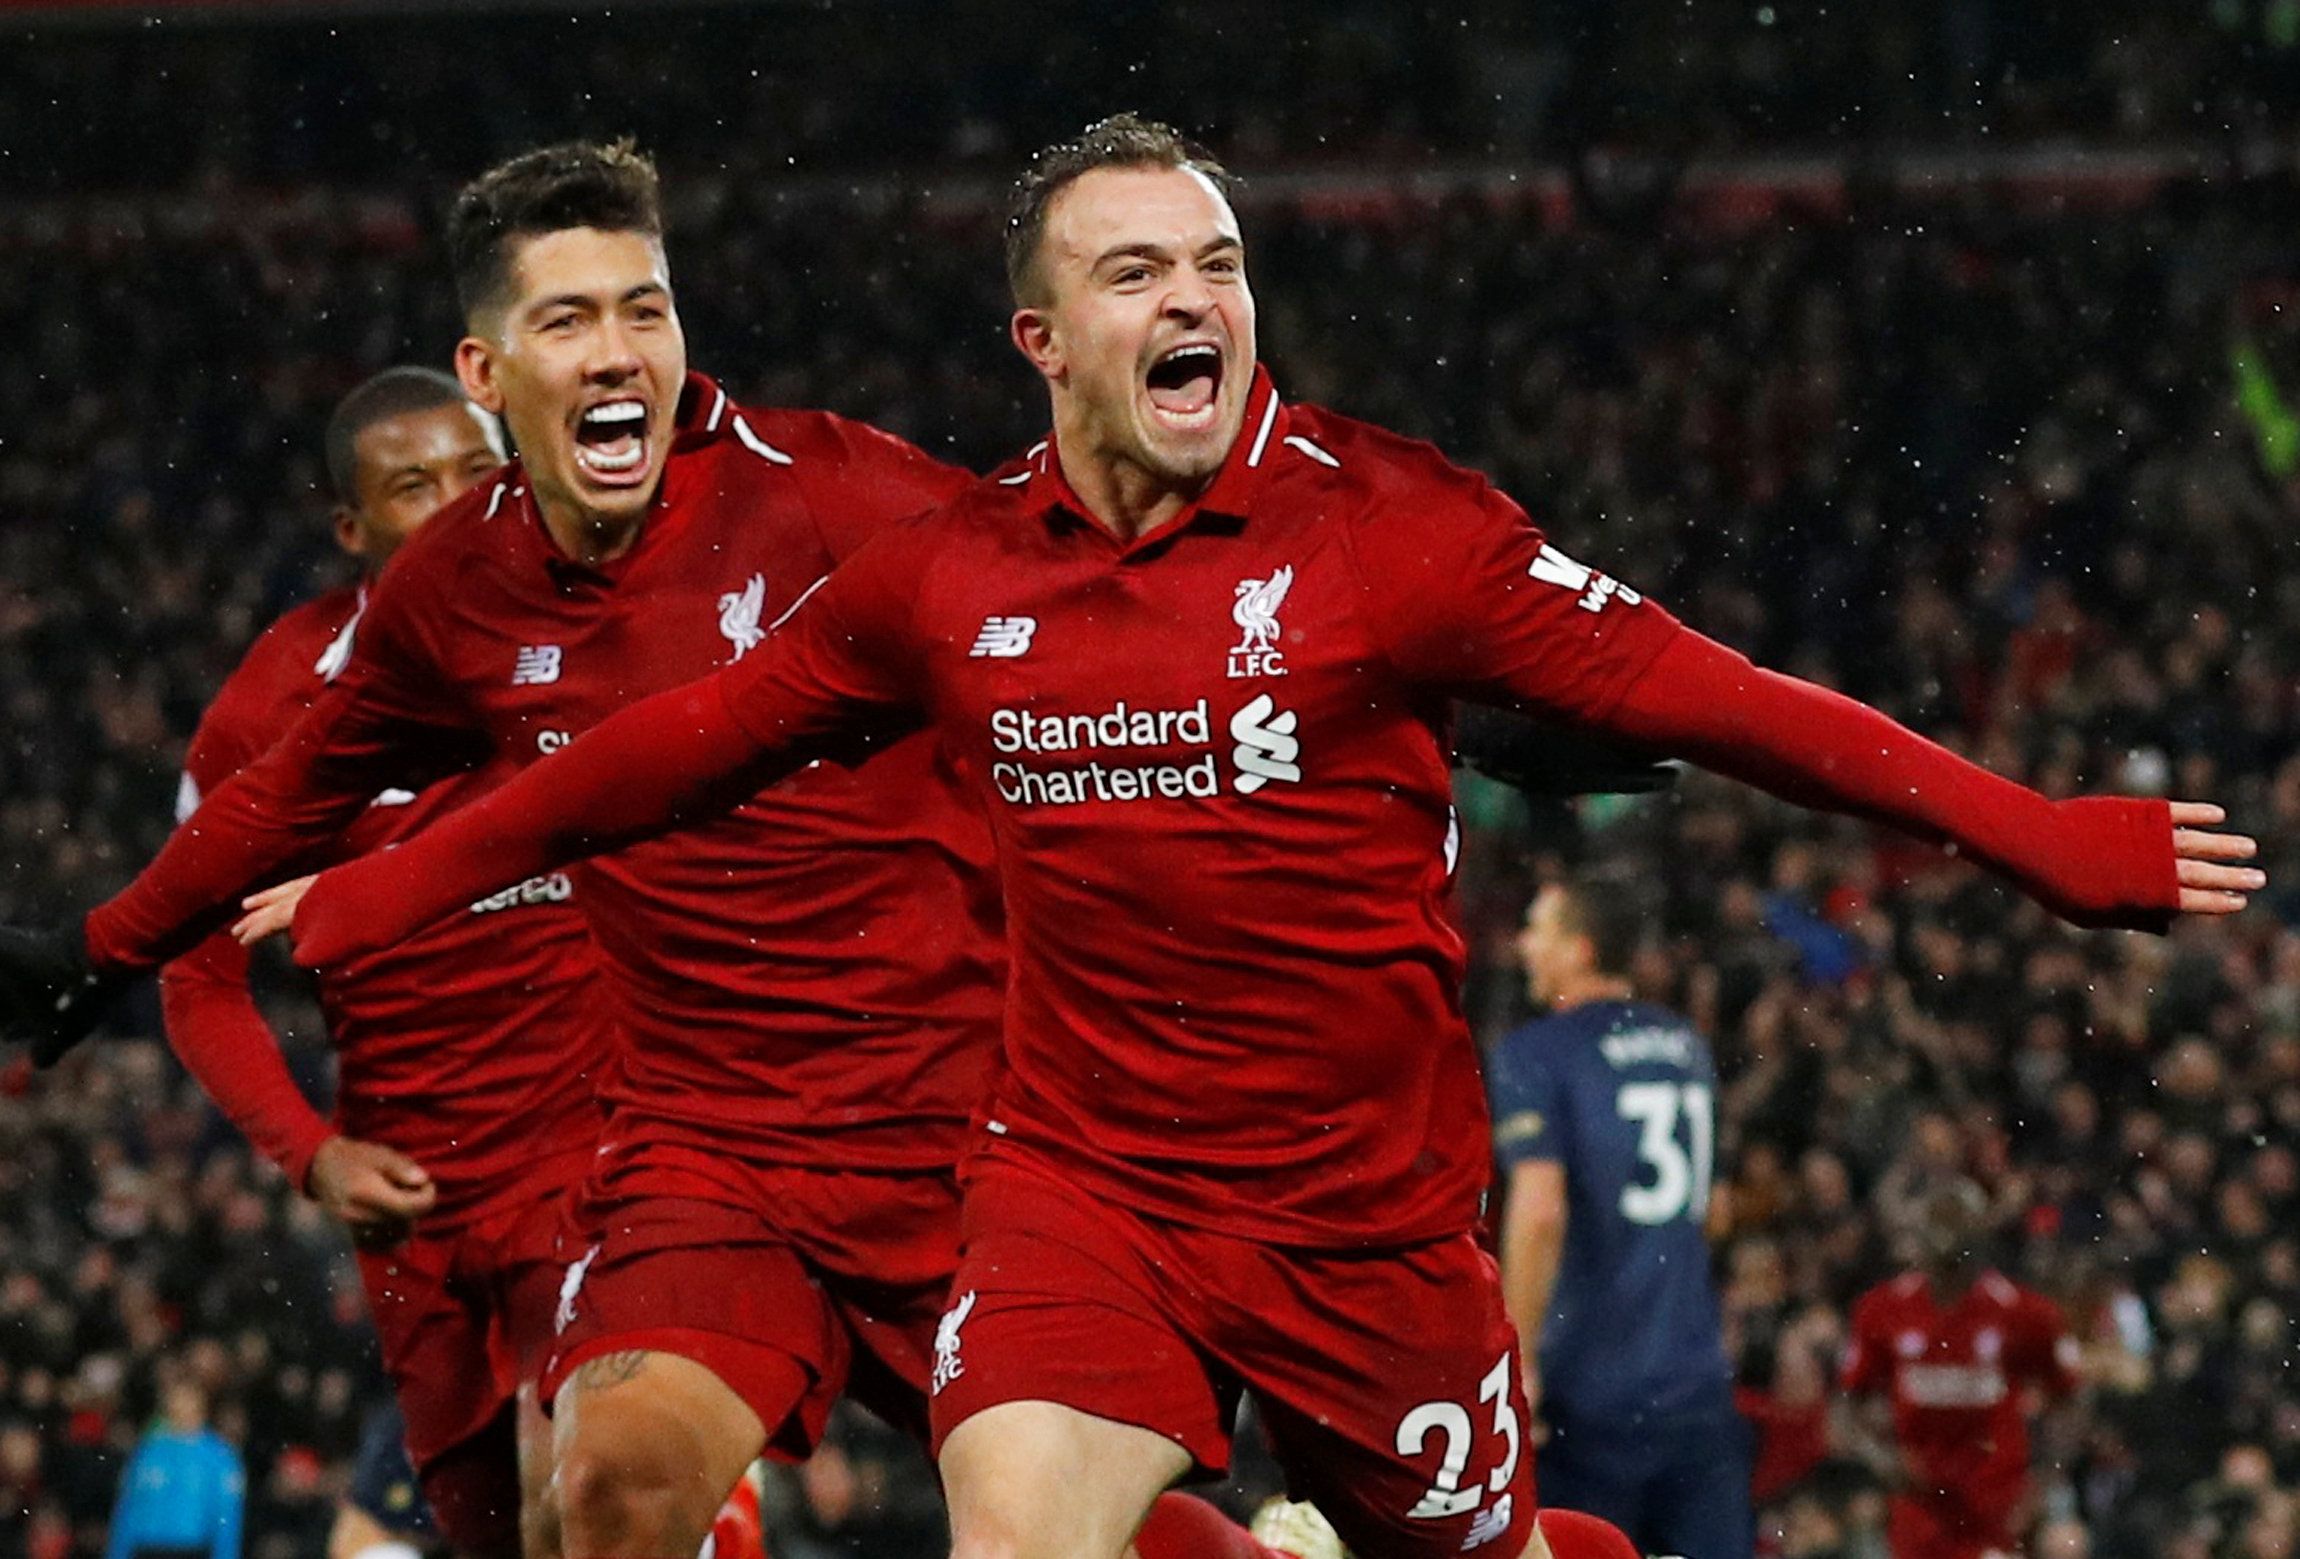 Soccer Football - Premier League - Liverpool v Manchester United - Anfield, Liverpool, Britain - December 16, 2018  Liverpool's Xherdan Shaqiri celebrates scoring their third goal with Roberto Firmino and Georginio Wijnaldum   REUTERS/Phil Noble  EDITORIAL USE ONLY. No use with unauthorized audio, video, data, fixture lists, club/league logos or 